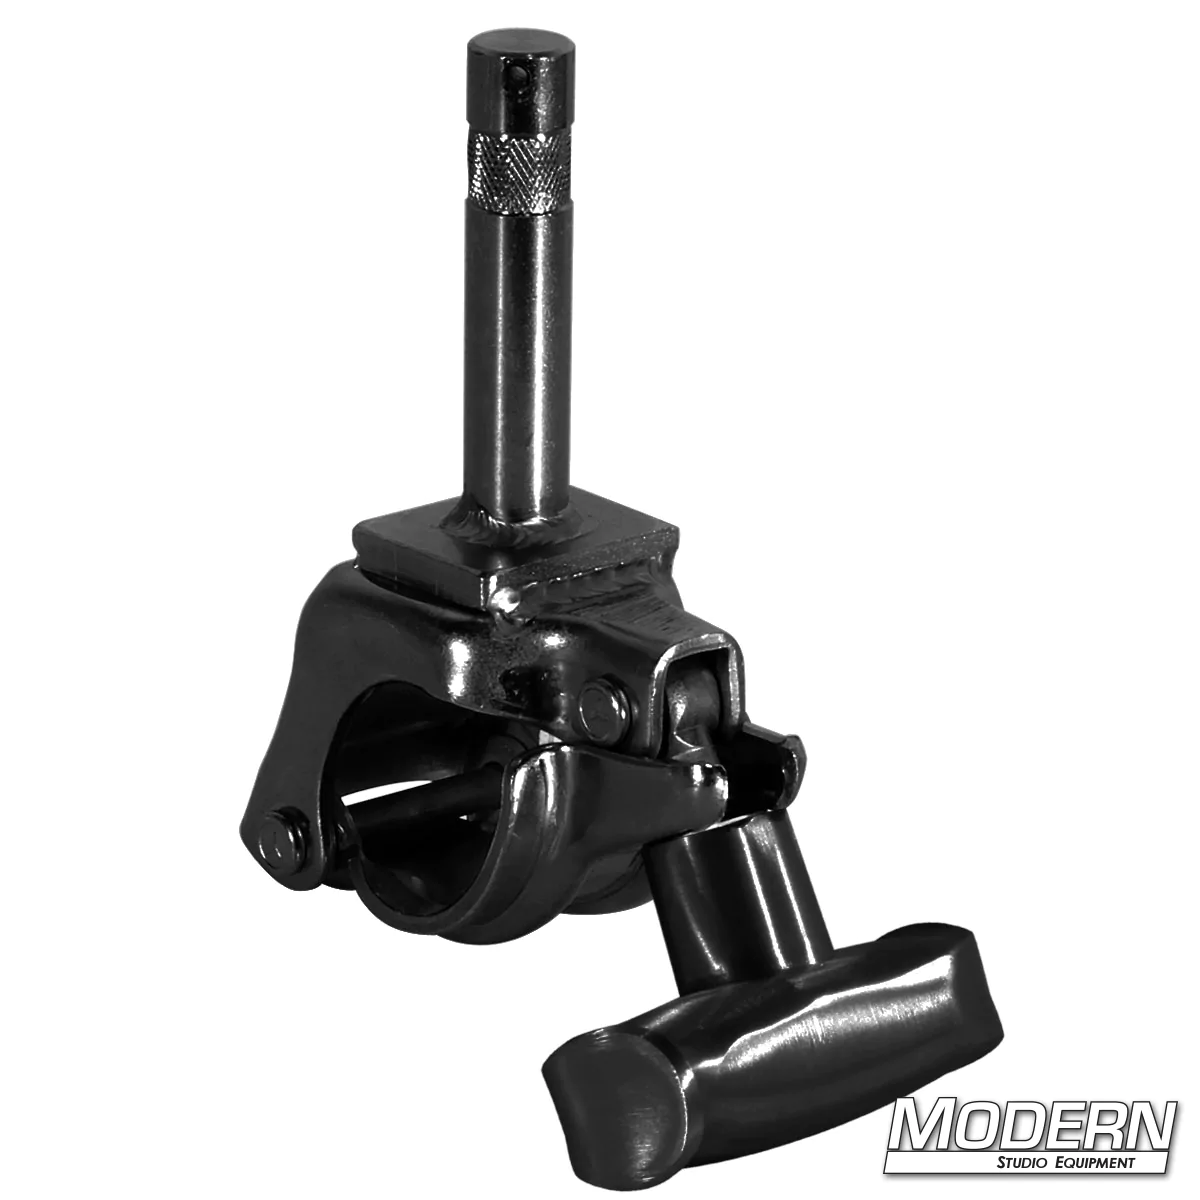 Grid Clamp with 5/8" Baby Pin - Black Zinc with Spin Handle